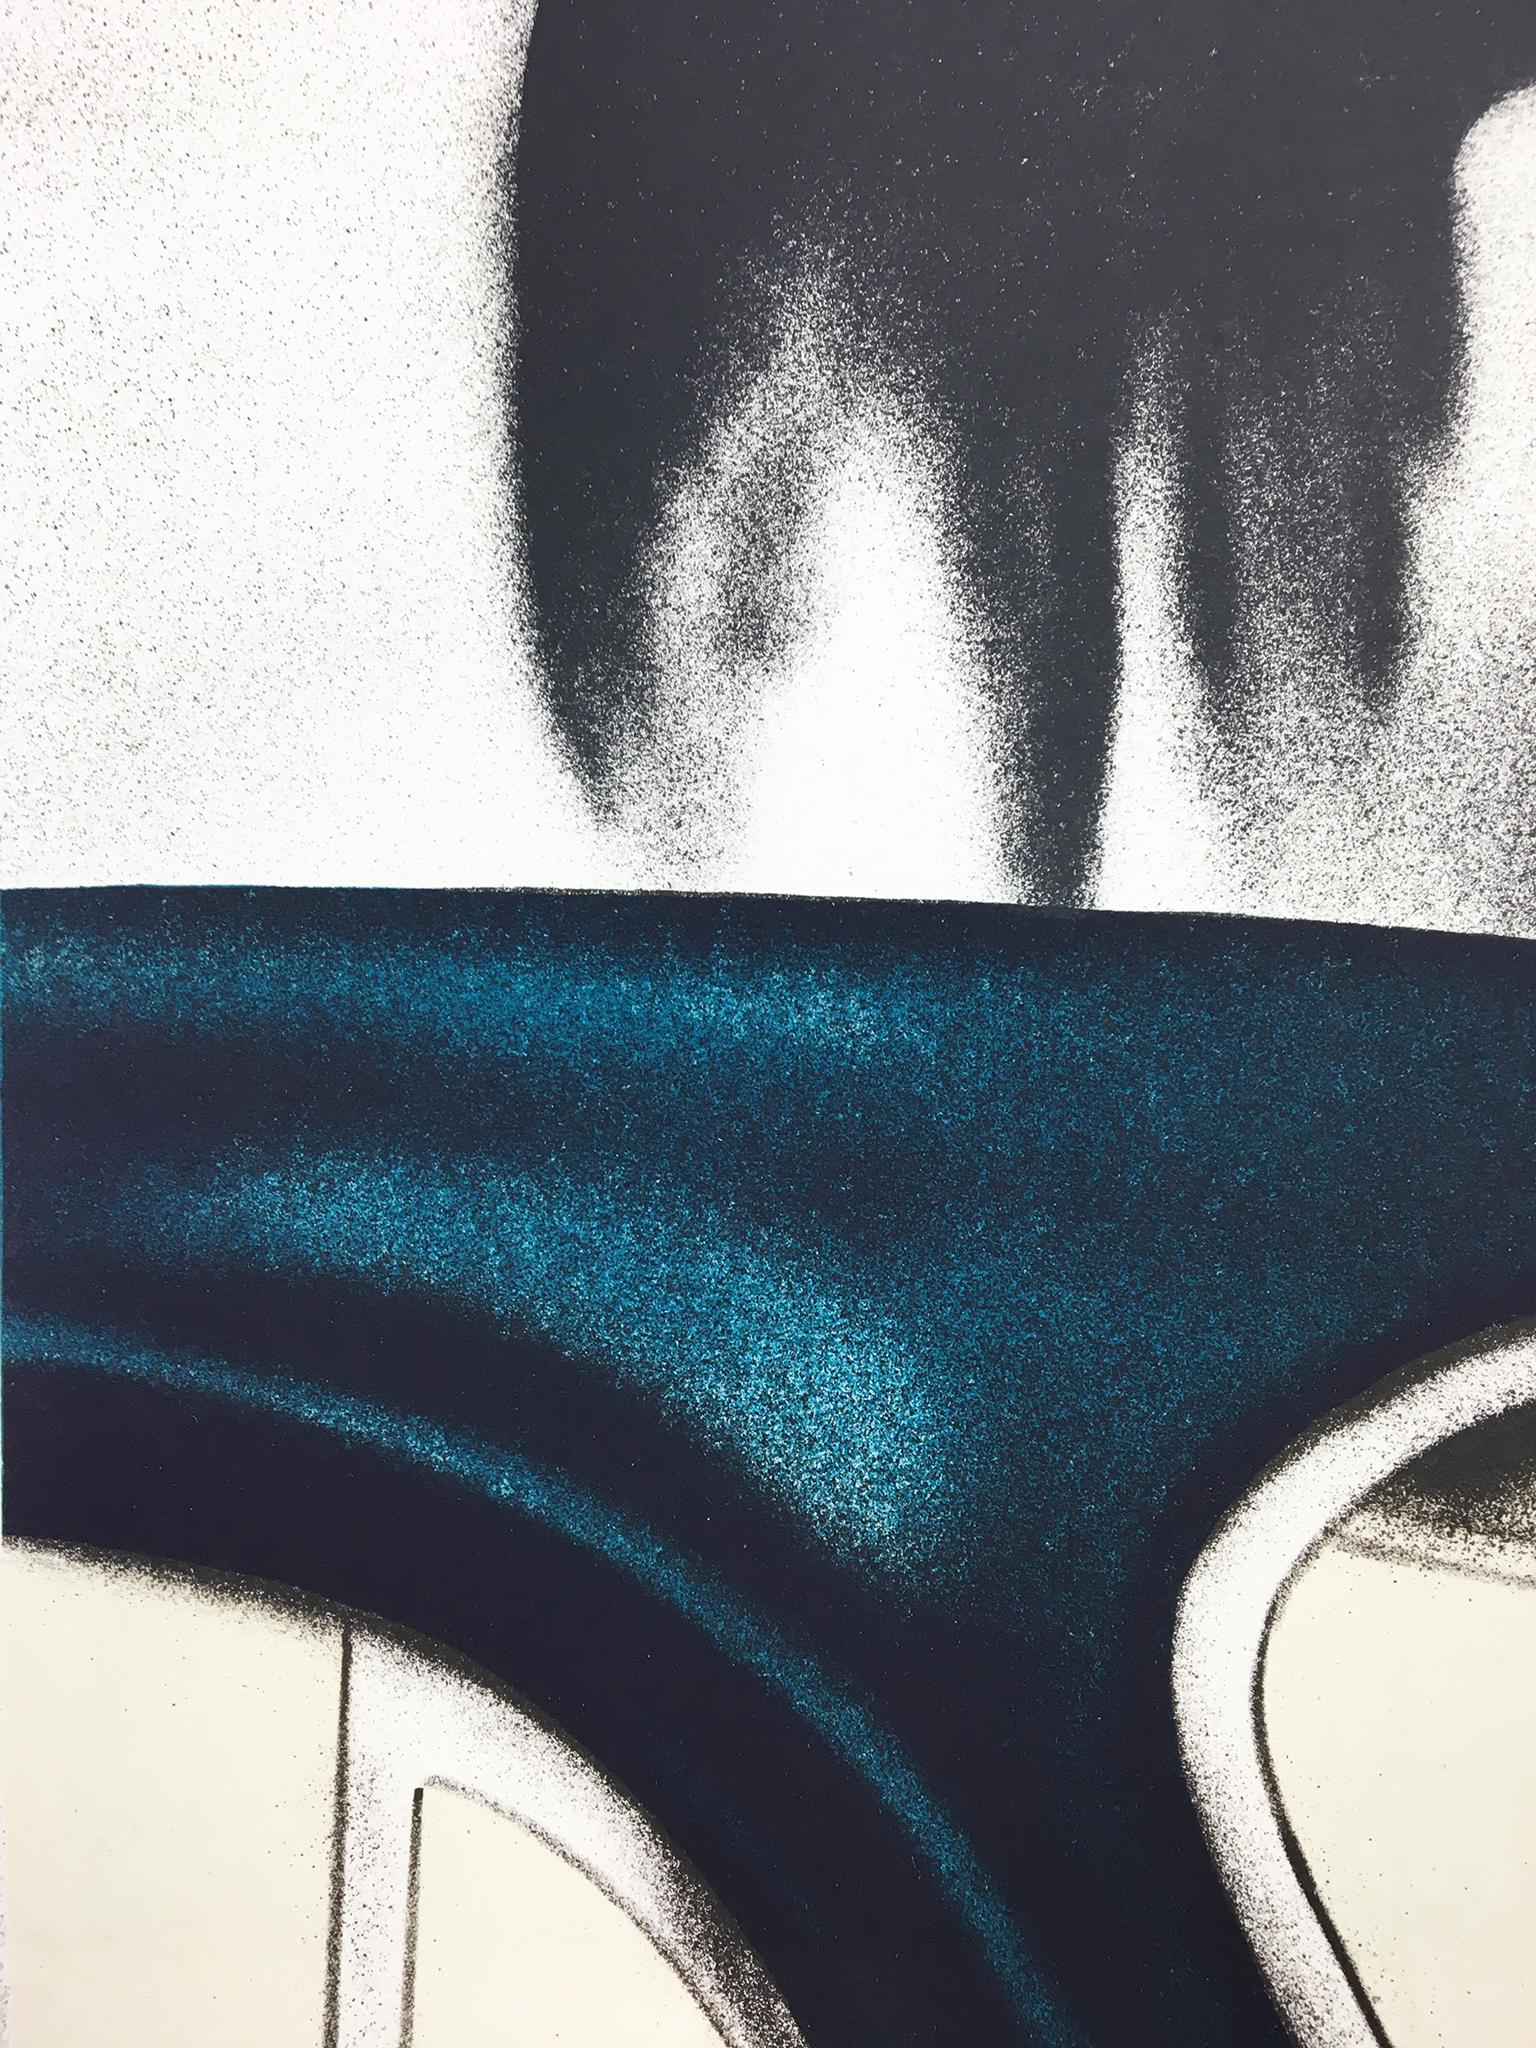 Printed in the same scale as the original James Rosenquist painting, this black and white, abstract pop art composition features a car door collaged over a gleaming, metallic chrome circle. The shining metal and automobile imagery is characteristic